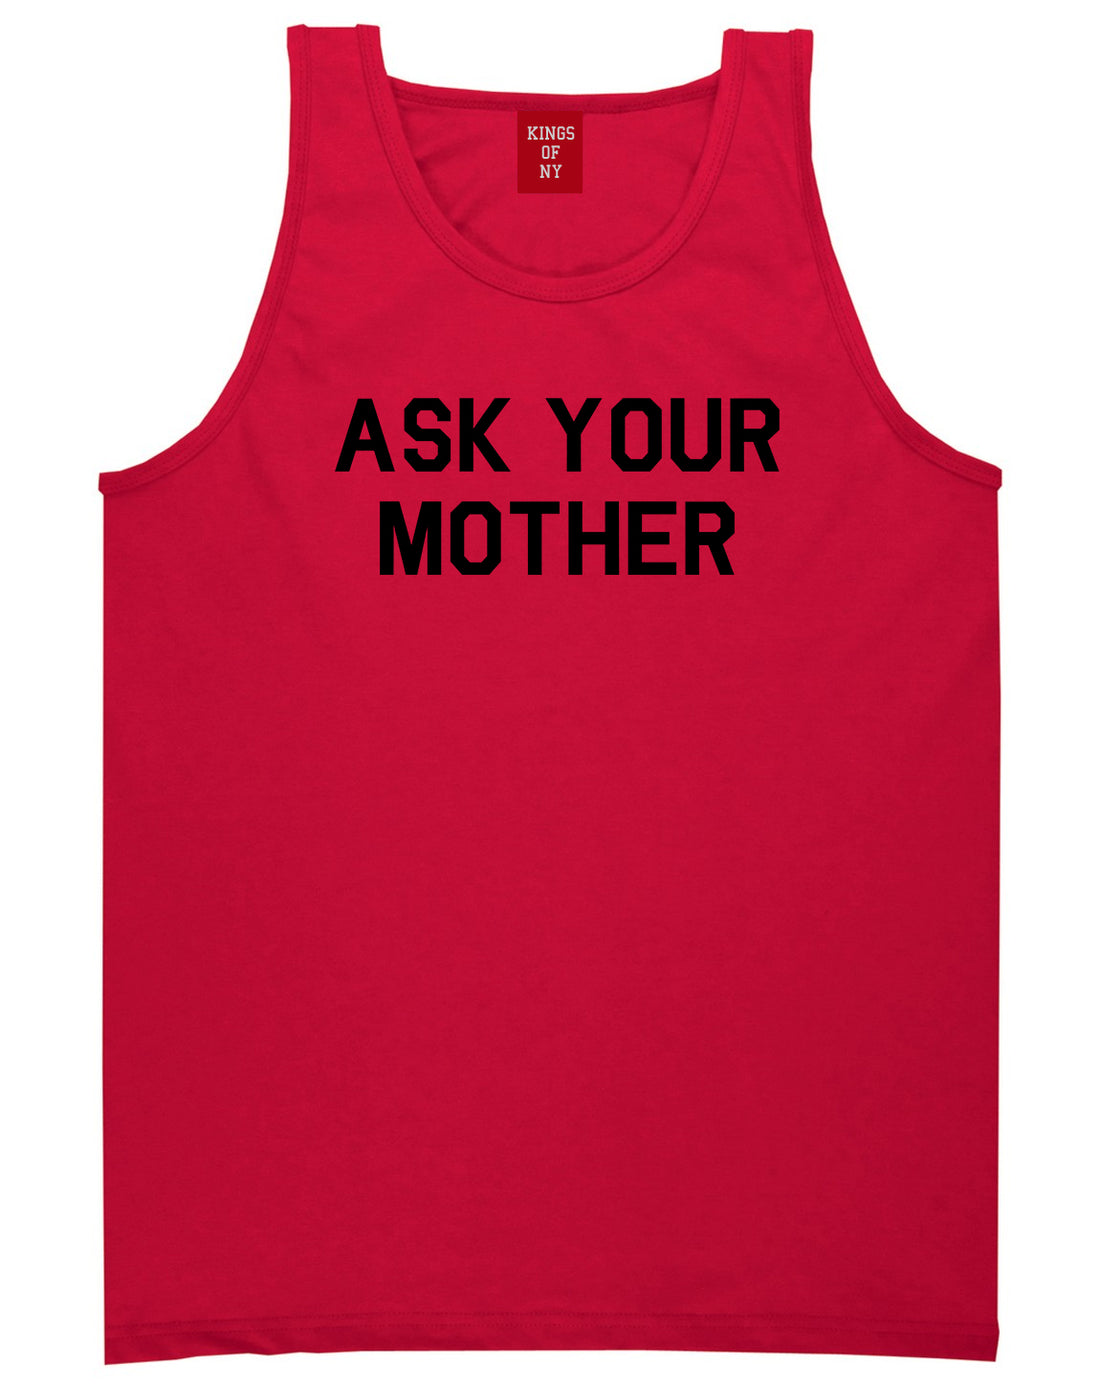 Ask Your Mother Funny Dad Mens Tank Top Shirt Red by Kings Of NY